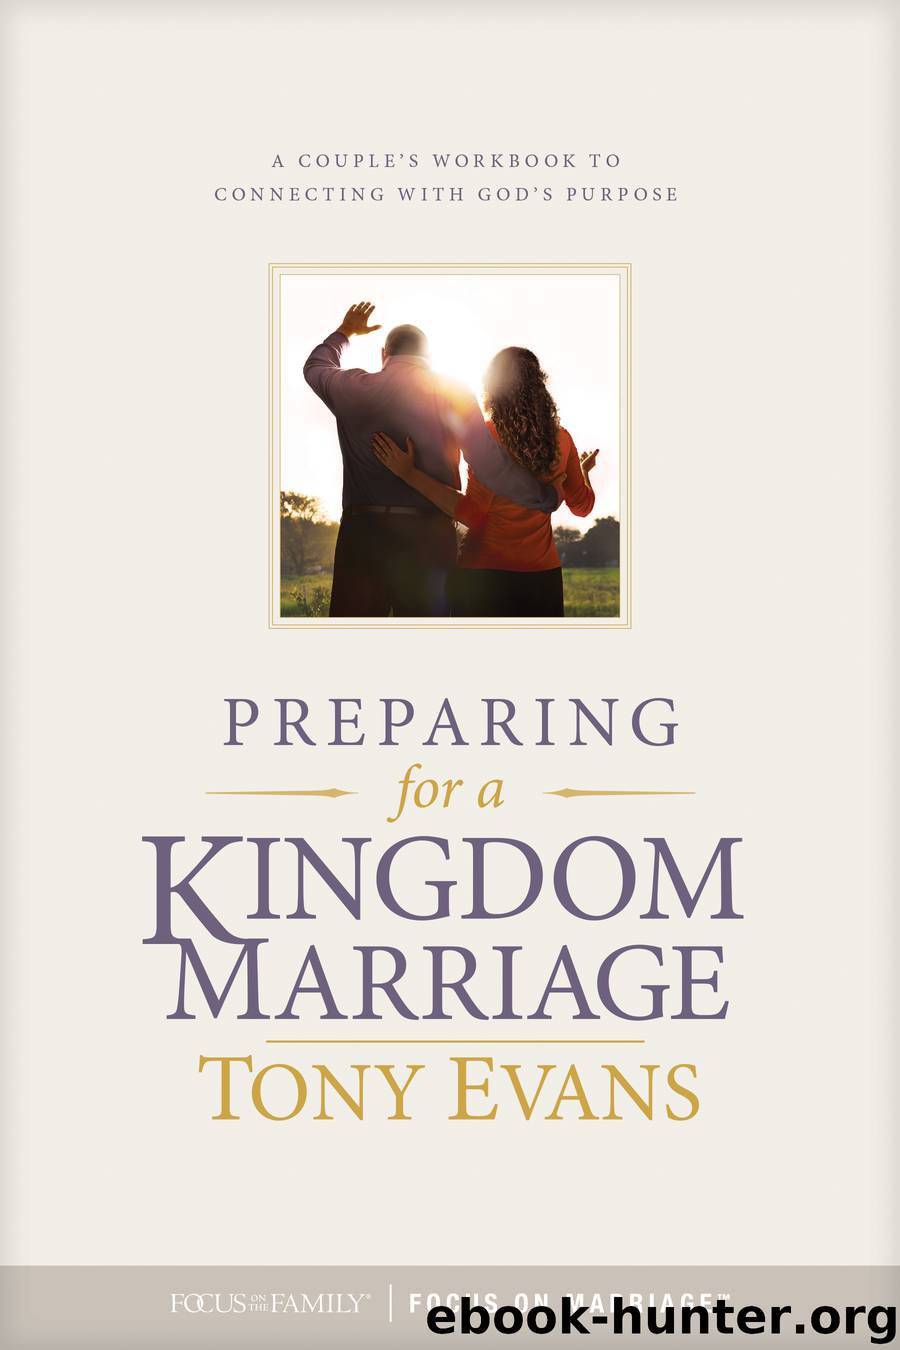 Preparing for a Kingdom Marriage by Tony Evans